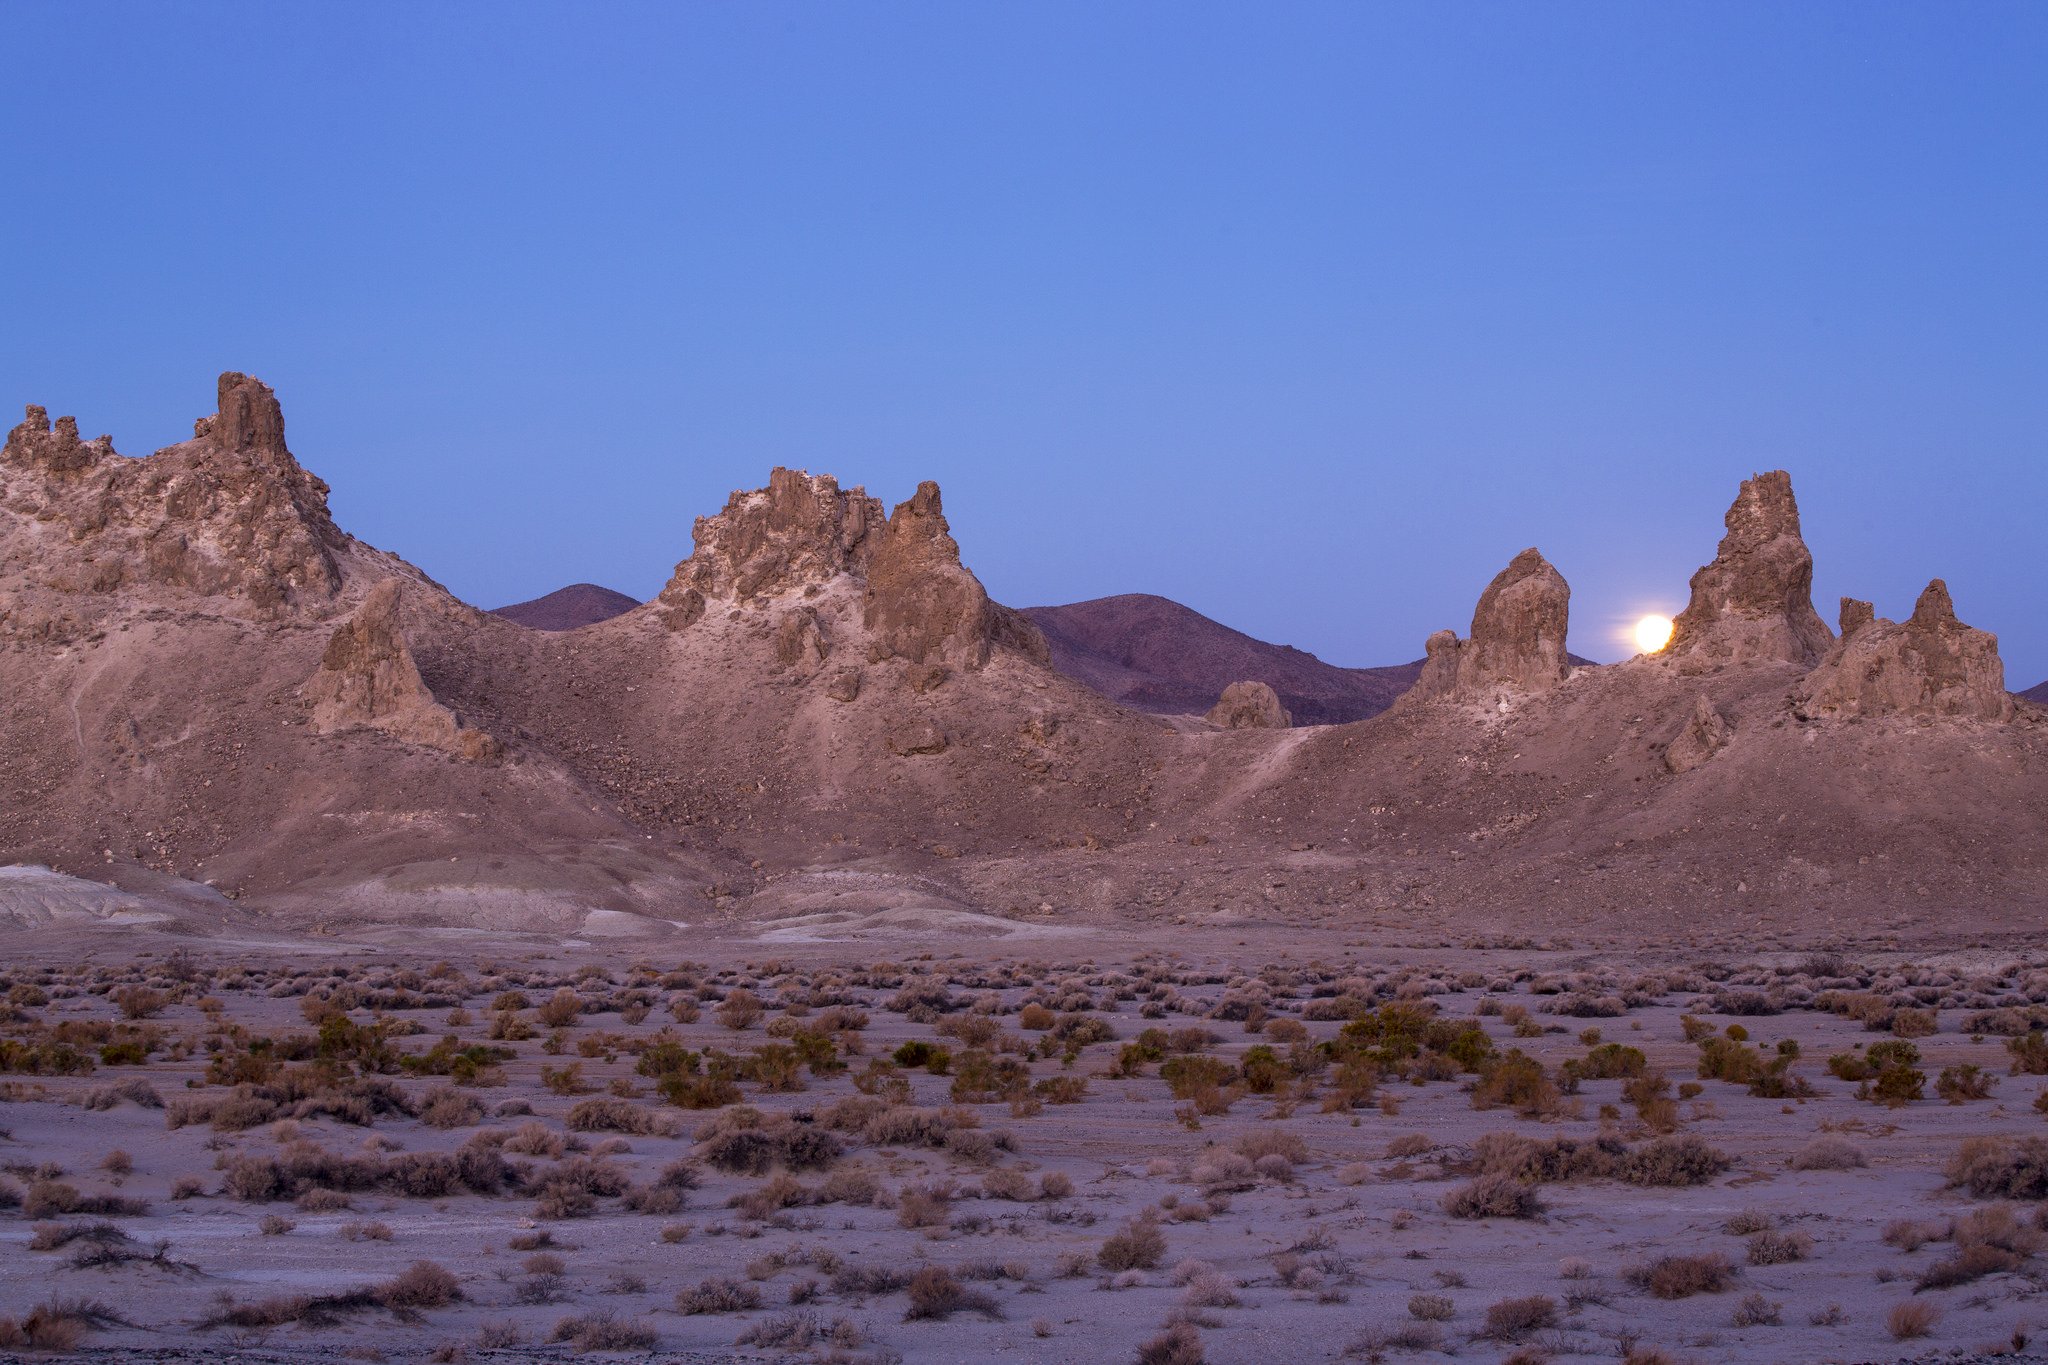 BLM_Winter_Bucket_List_-7-_Trona_Pinnacles,_California,_for_Out_of_This_World_Rock_Formations_(15515503494).jpg